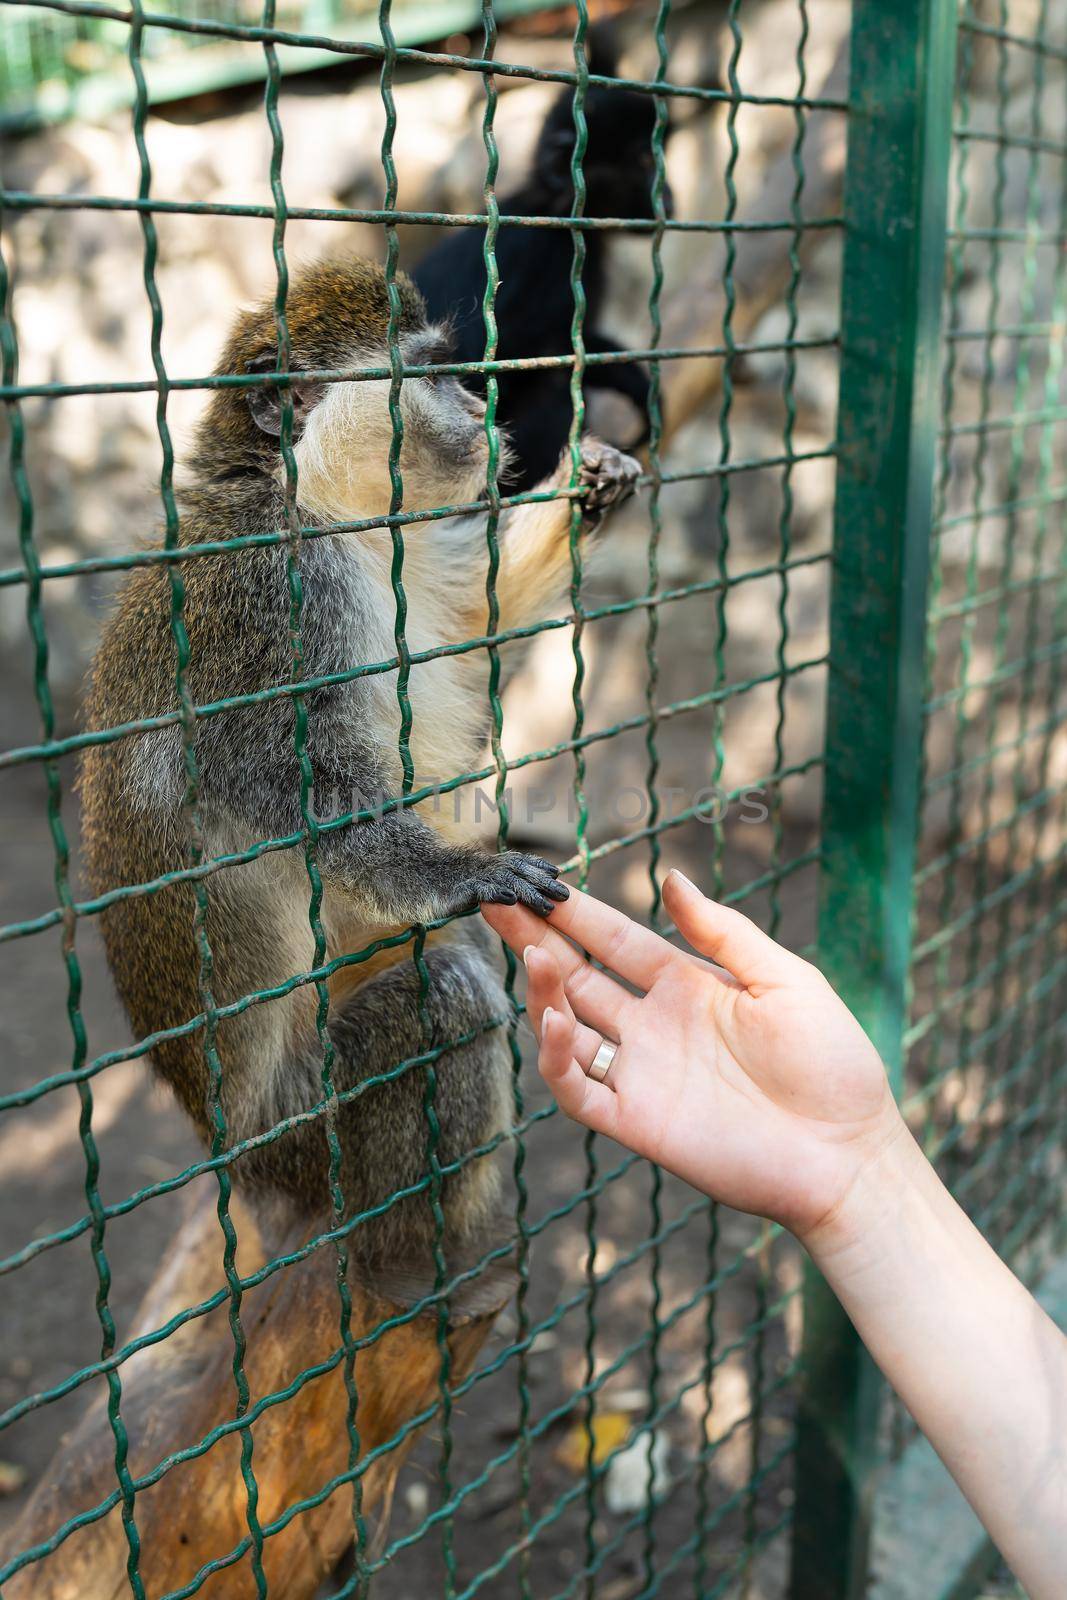 The animal needs human love and protection. The monkey holds the girl's hand in the petting zoo. by sfinks